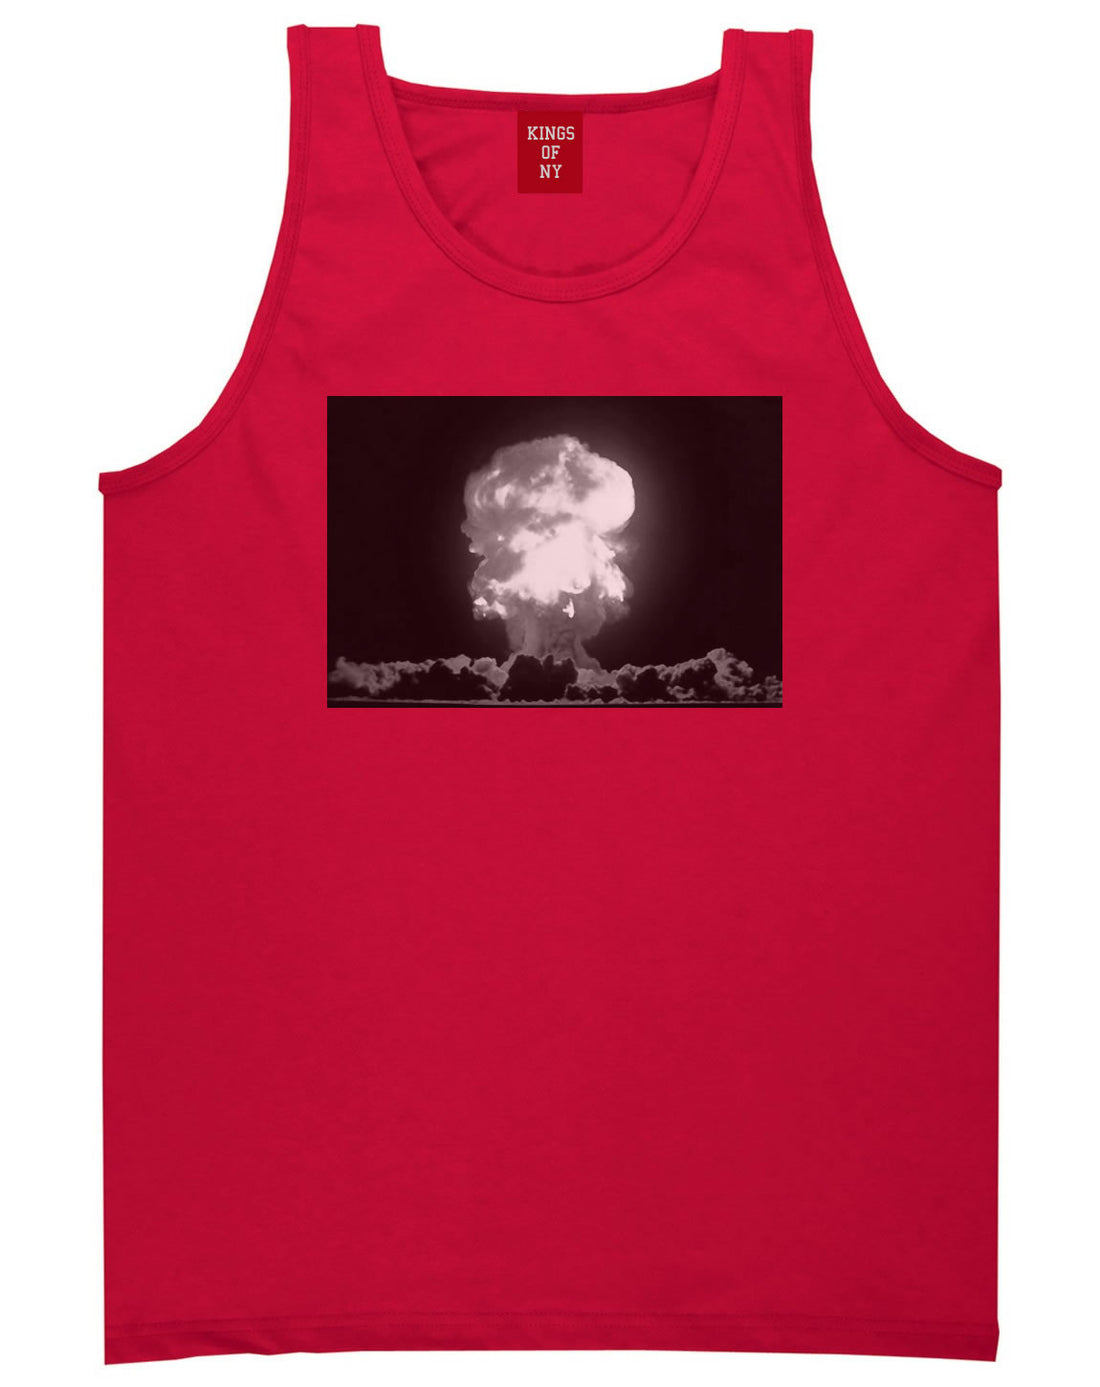 Explosion Nuclear Bomb Cloud Tank Top in Red By Kings Of NY